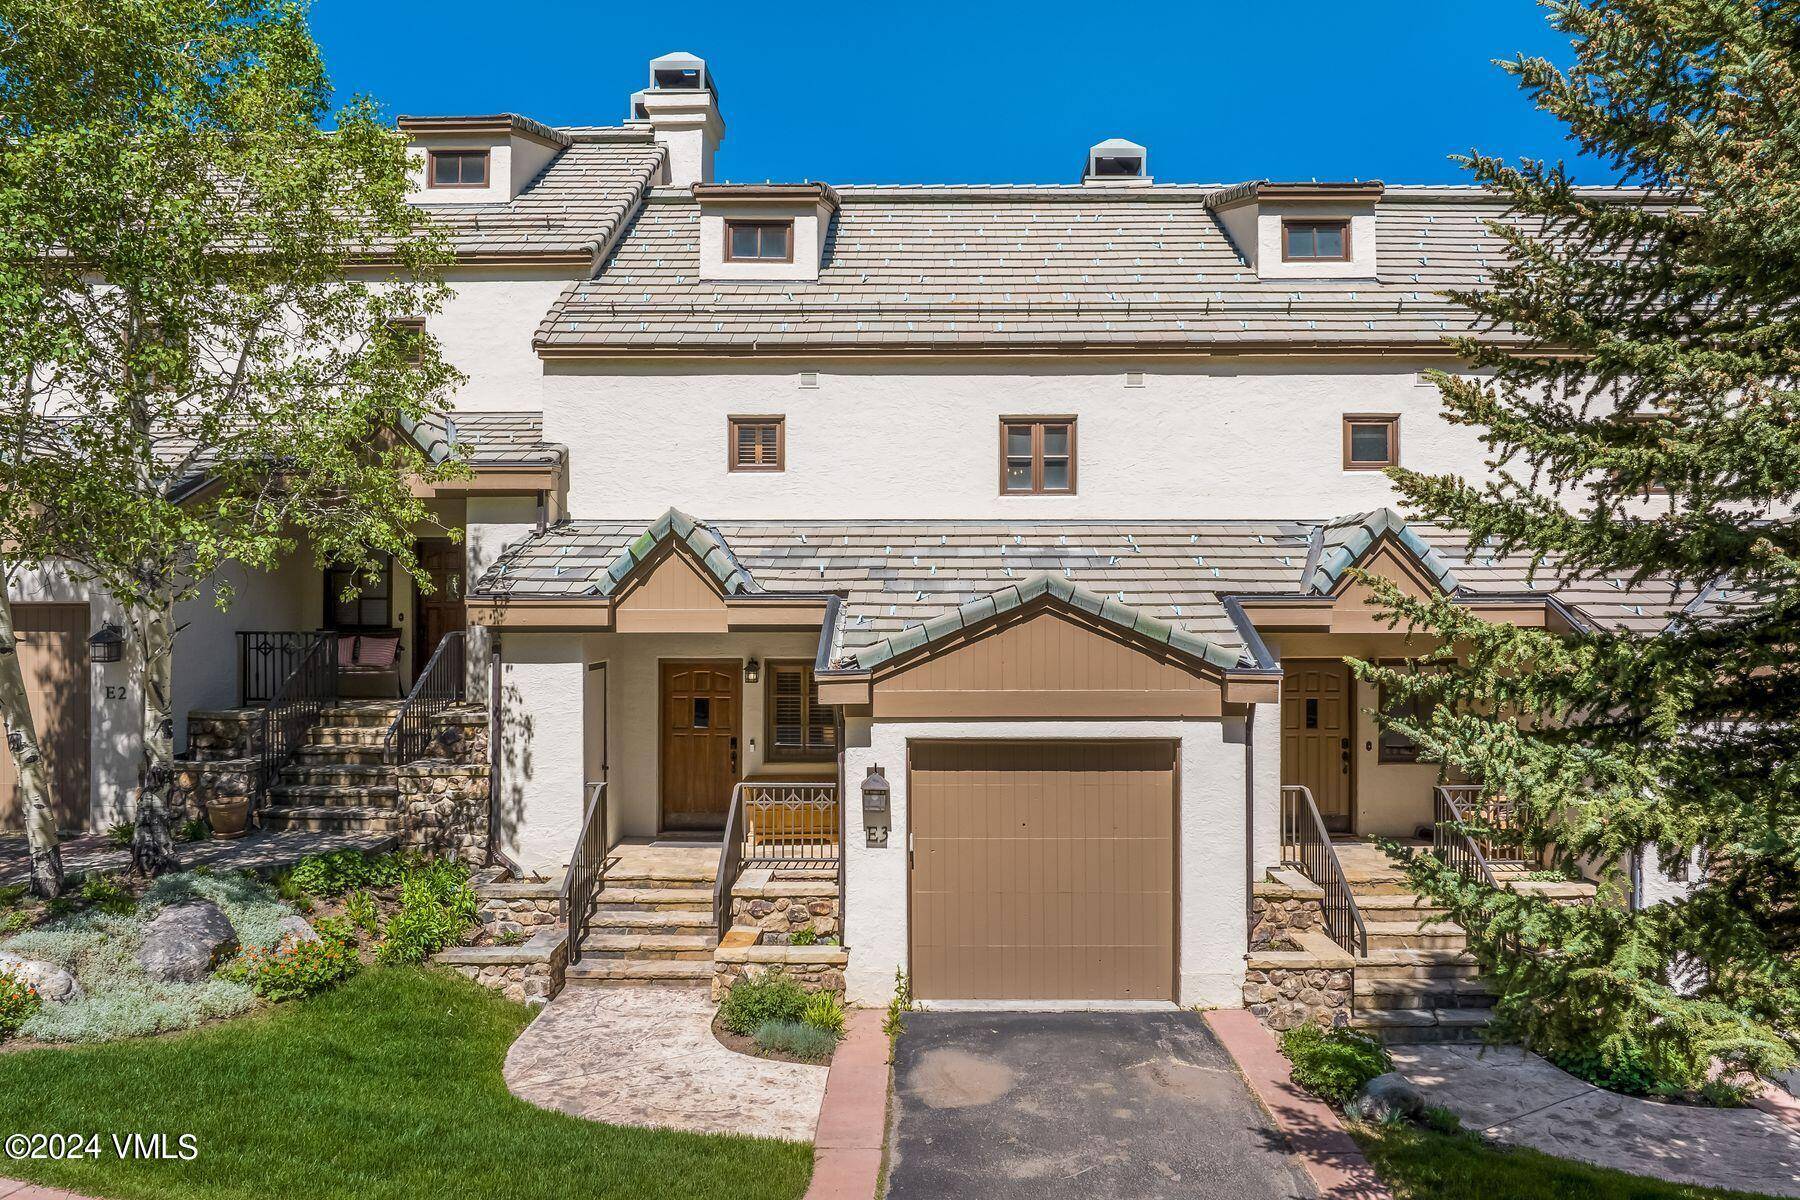 Steps from the ski slopes this sun filled townhome within walking distance to Beaver Creek Village has 3 bedrooms plus a family room den for additional family and friends.